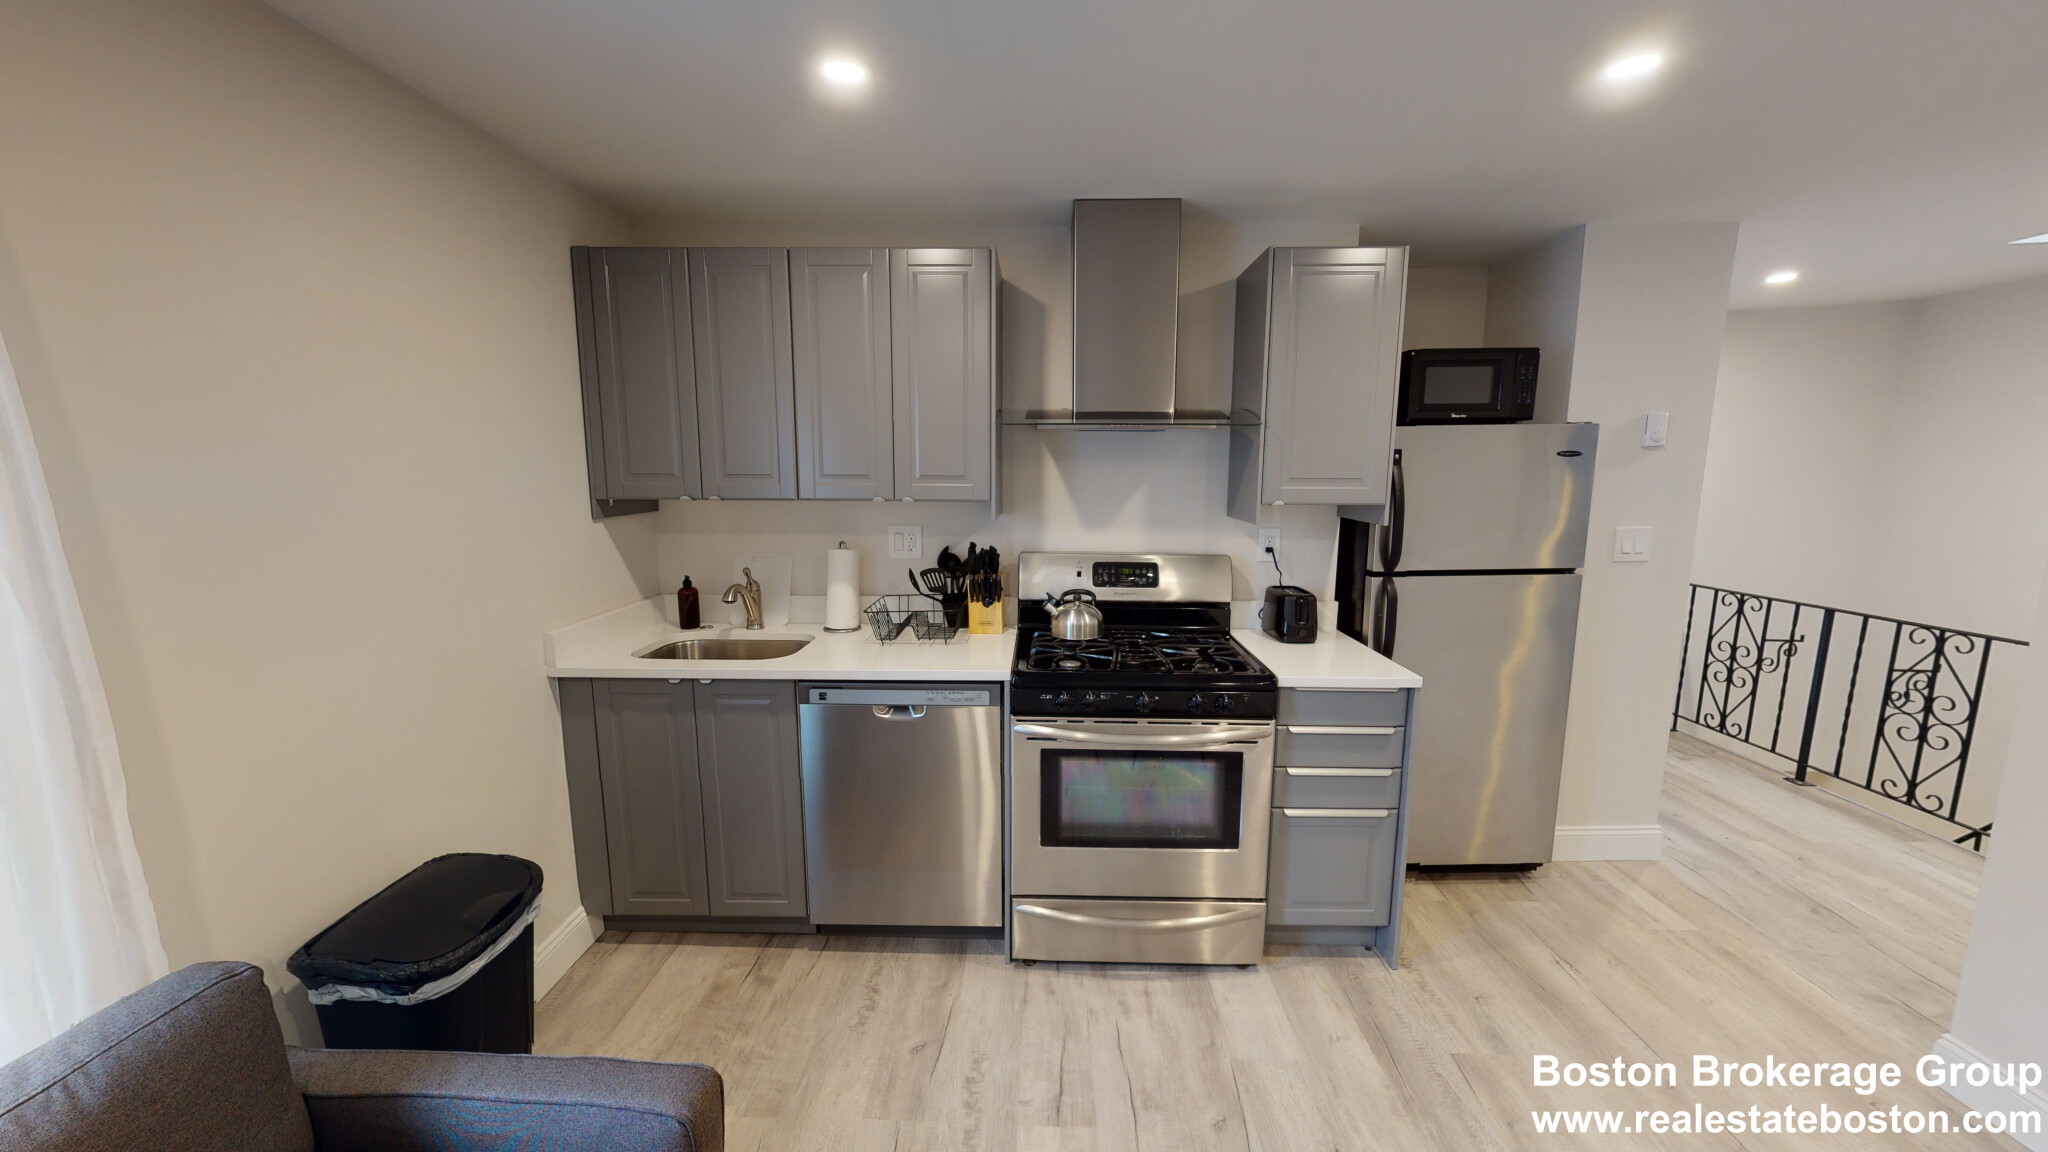 Photos of apartment on Lucy St.,Boston MA 02125